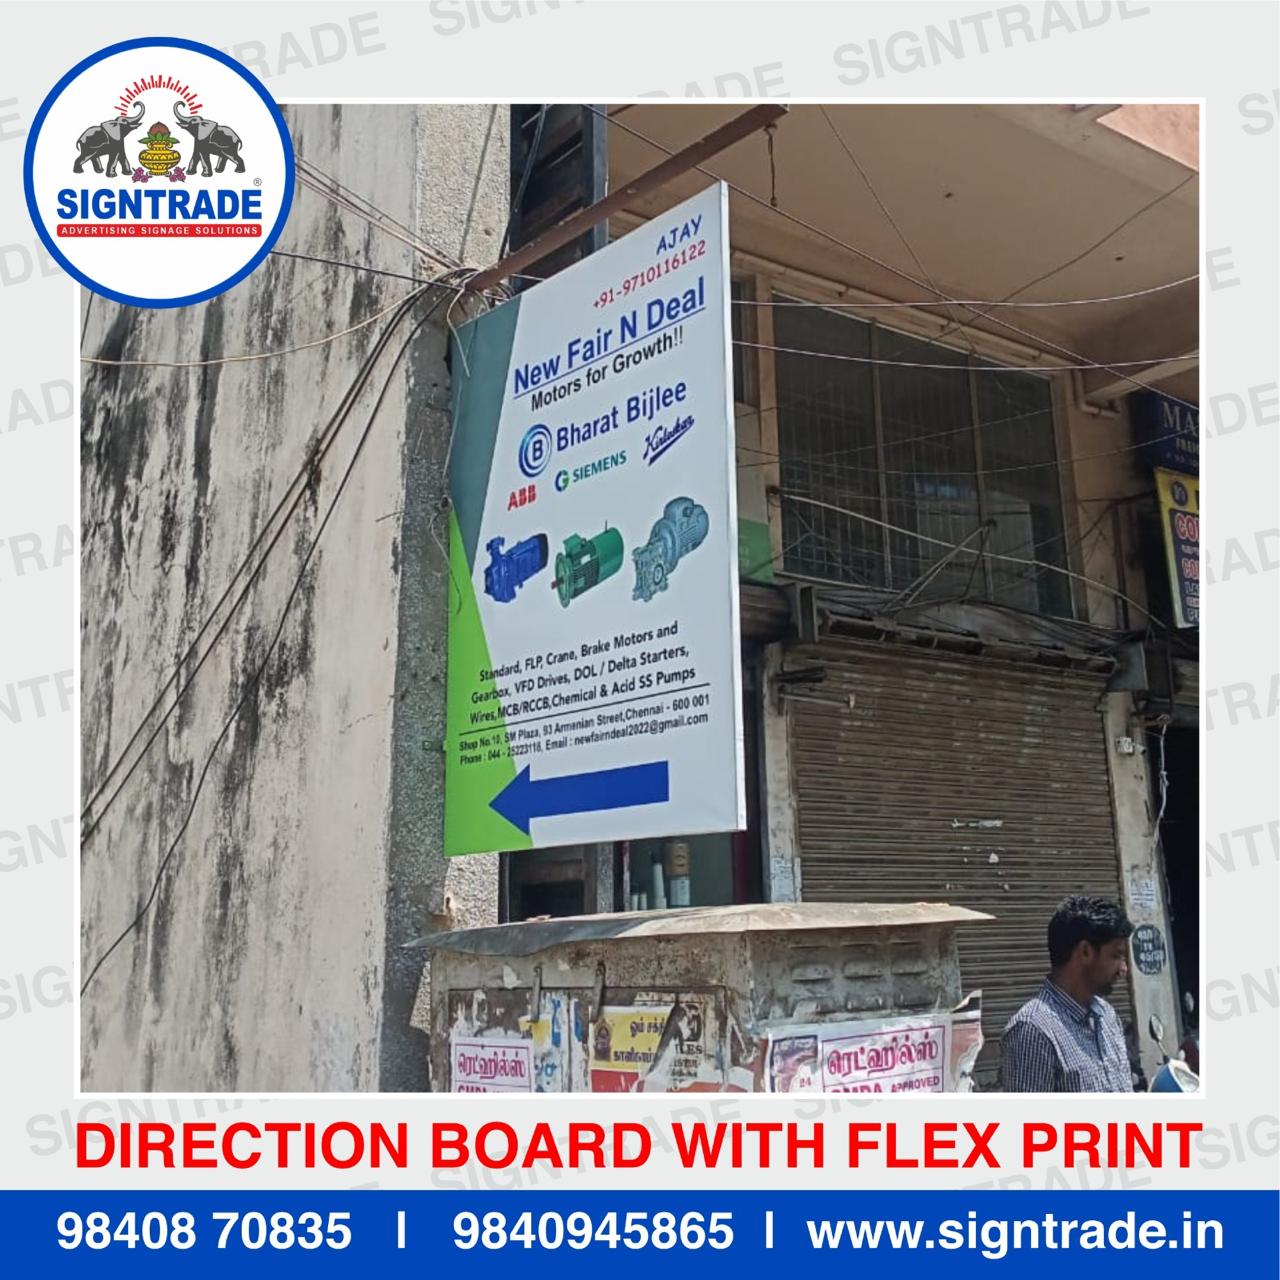 Direction Board with Flex Print in Chennai